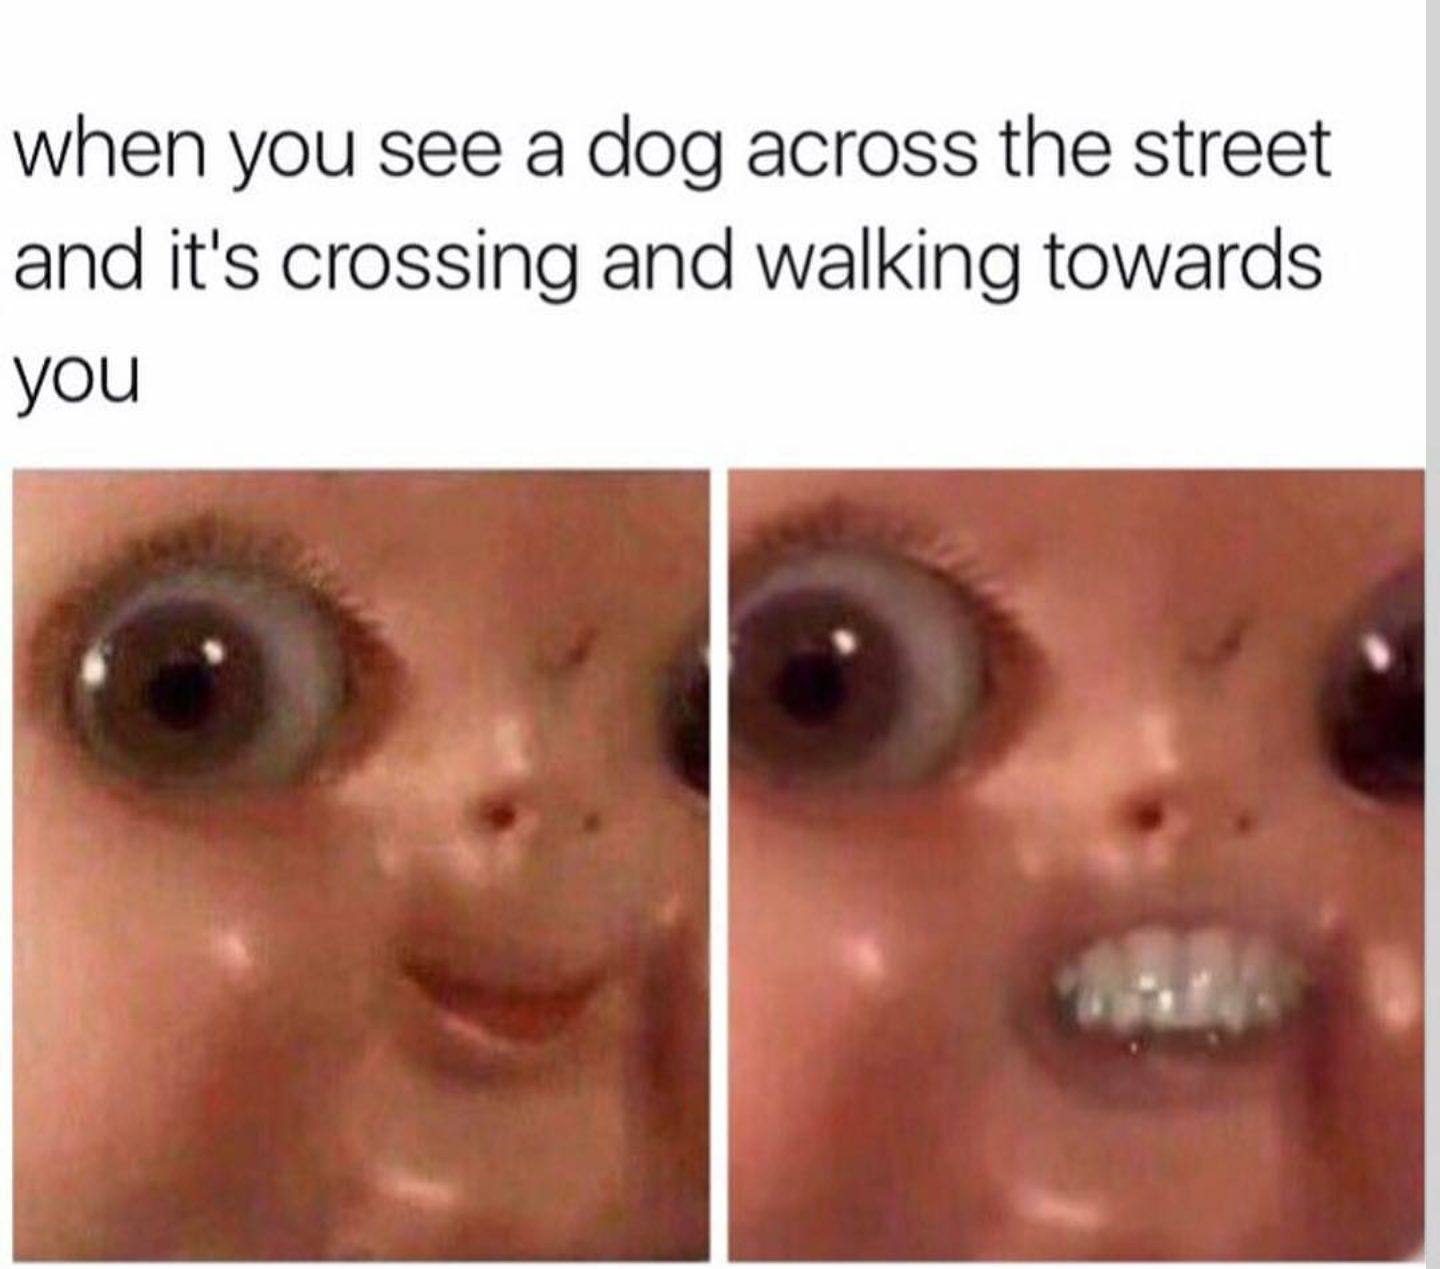 you see a dog across the street meme - when you see a dog across the street and it's crossing and walking towards you